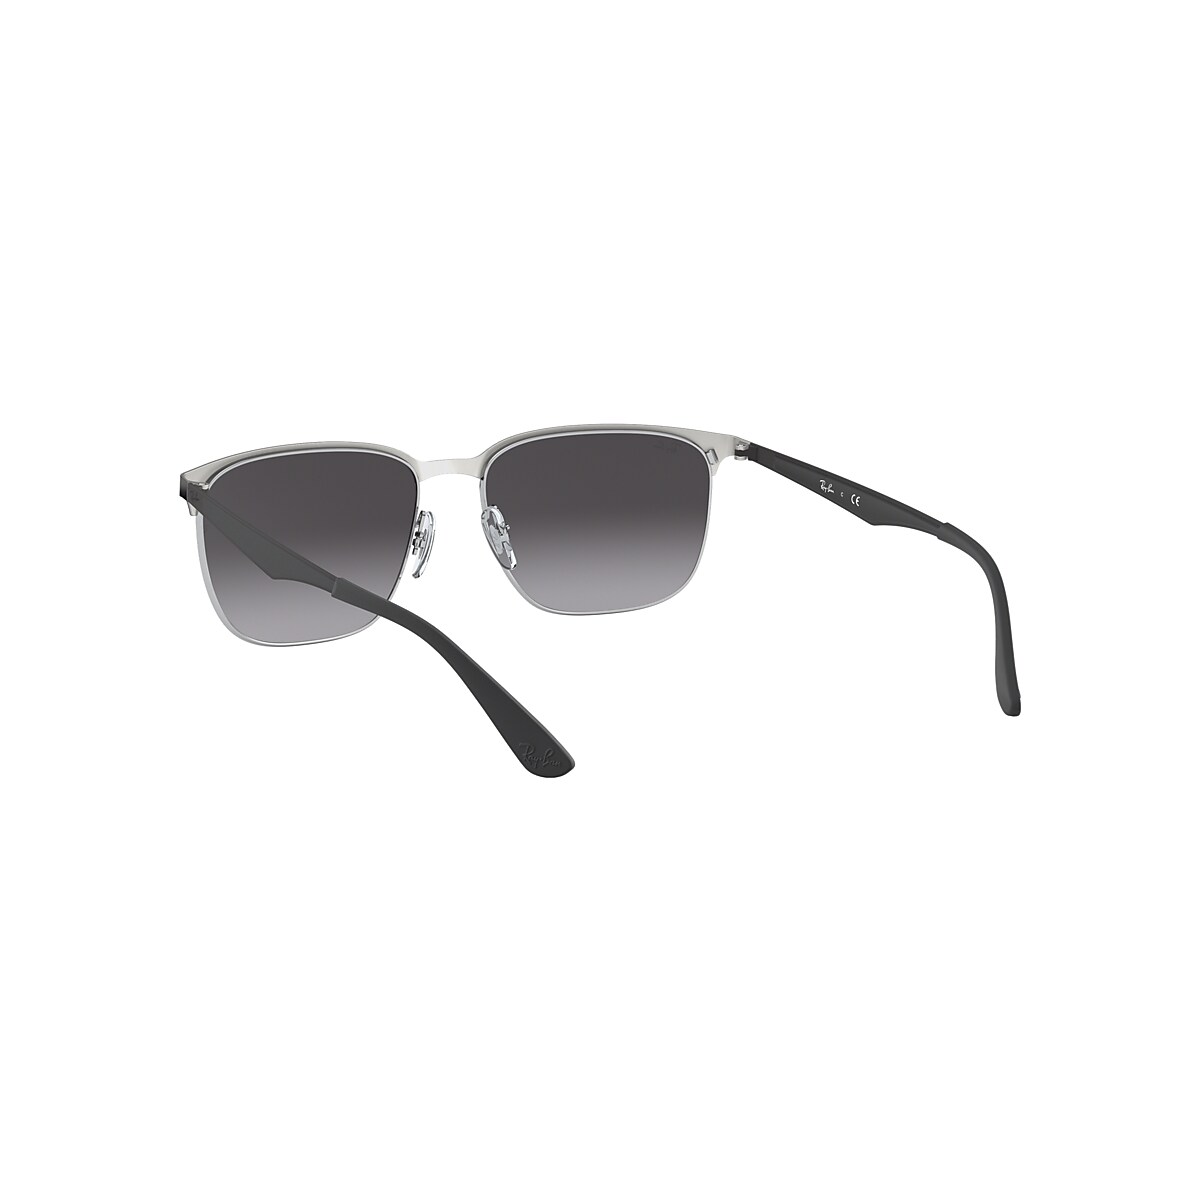 RB3569 Sunglasses in Black On Silver and Grey - RB3569 | Ray-Ban® US